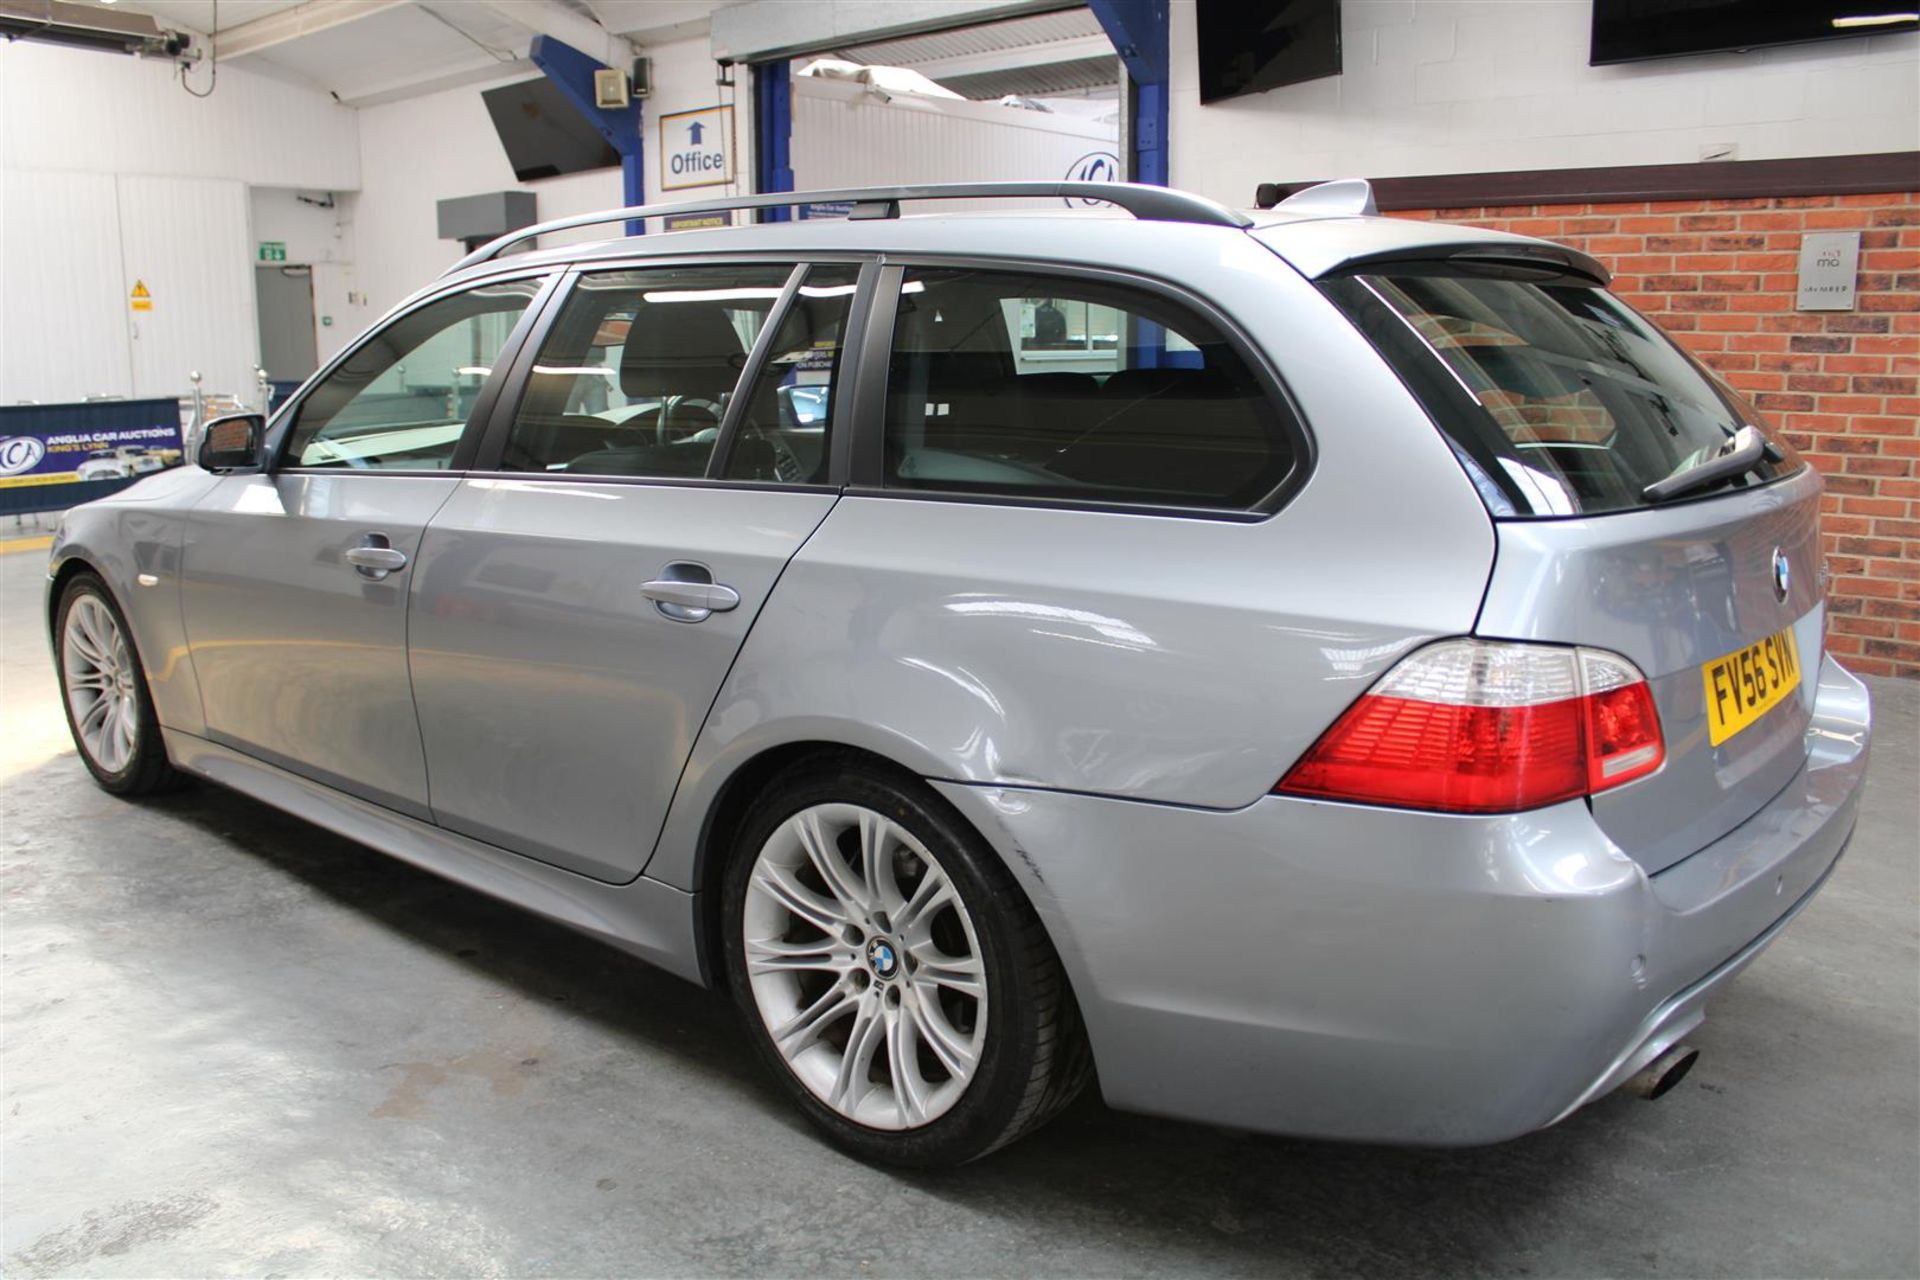 56 06 BMW 520D M Sport Touring Auto - Image 35 of 36